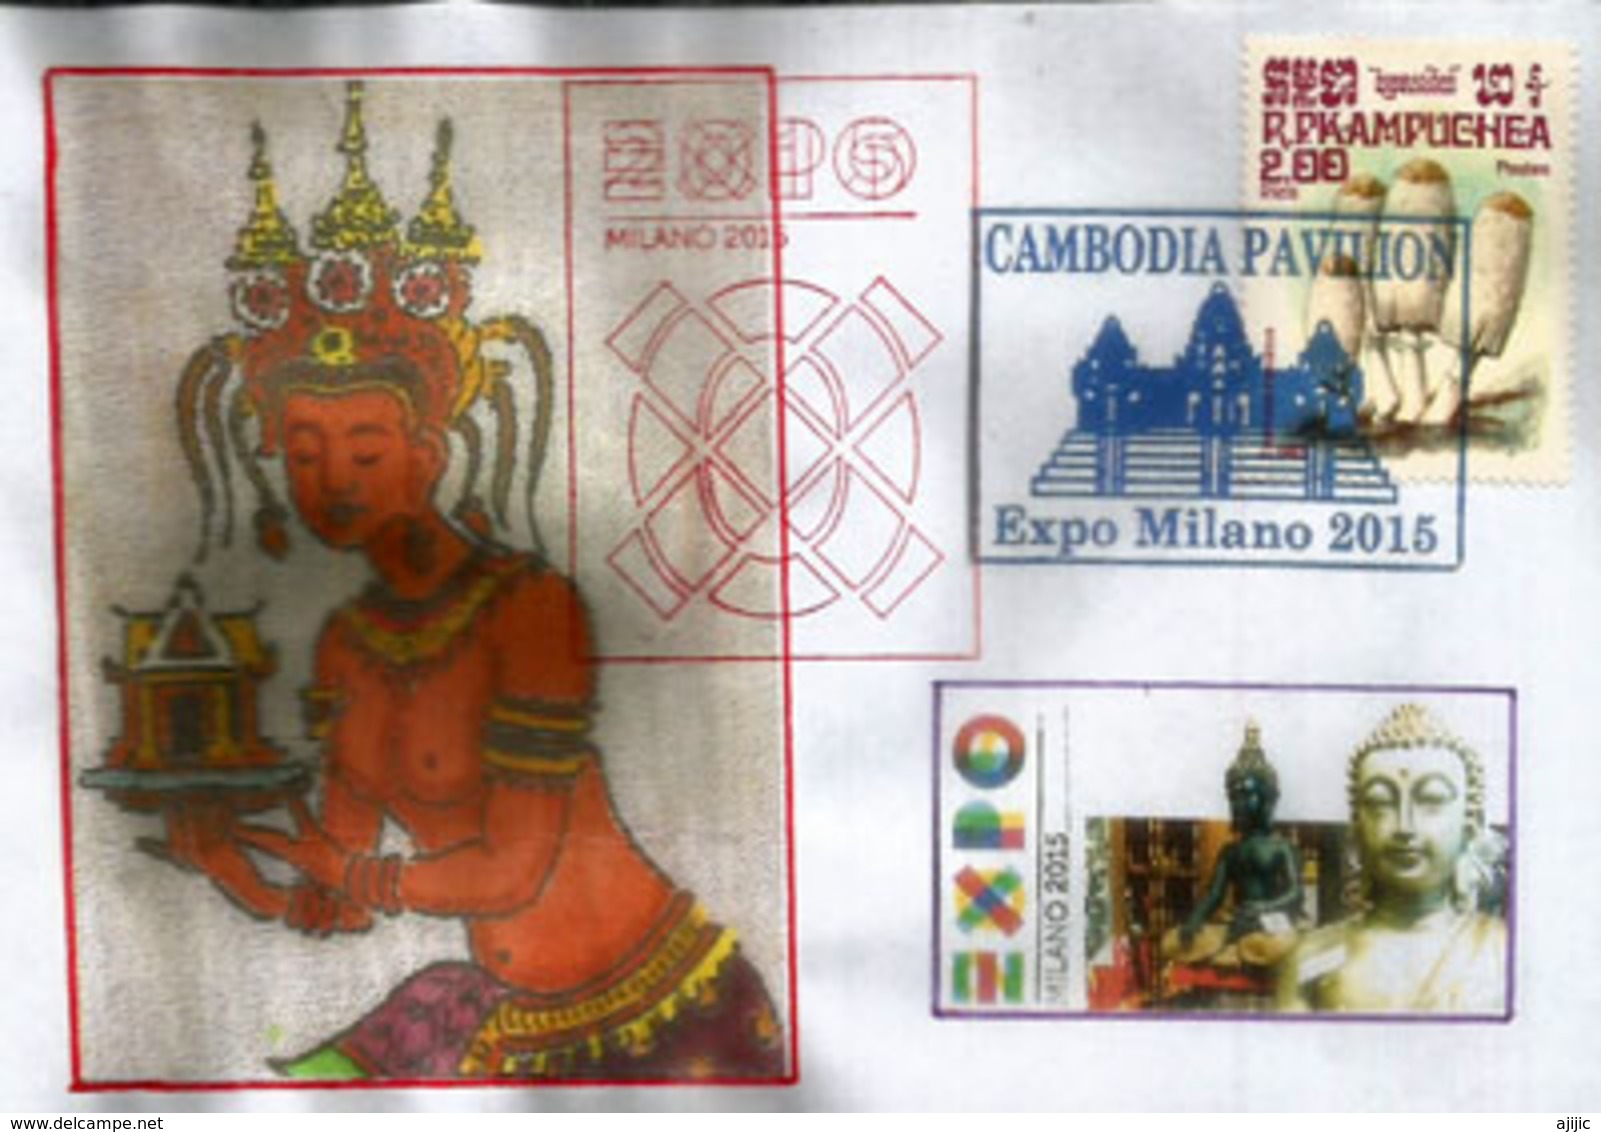 CAMBODIA/CAMBODGE.UNIVERSAL EXPO MILANO 2015 .Letter From The Cambodian Pavilion With Stamp Of Cambodia - Cambodge